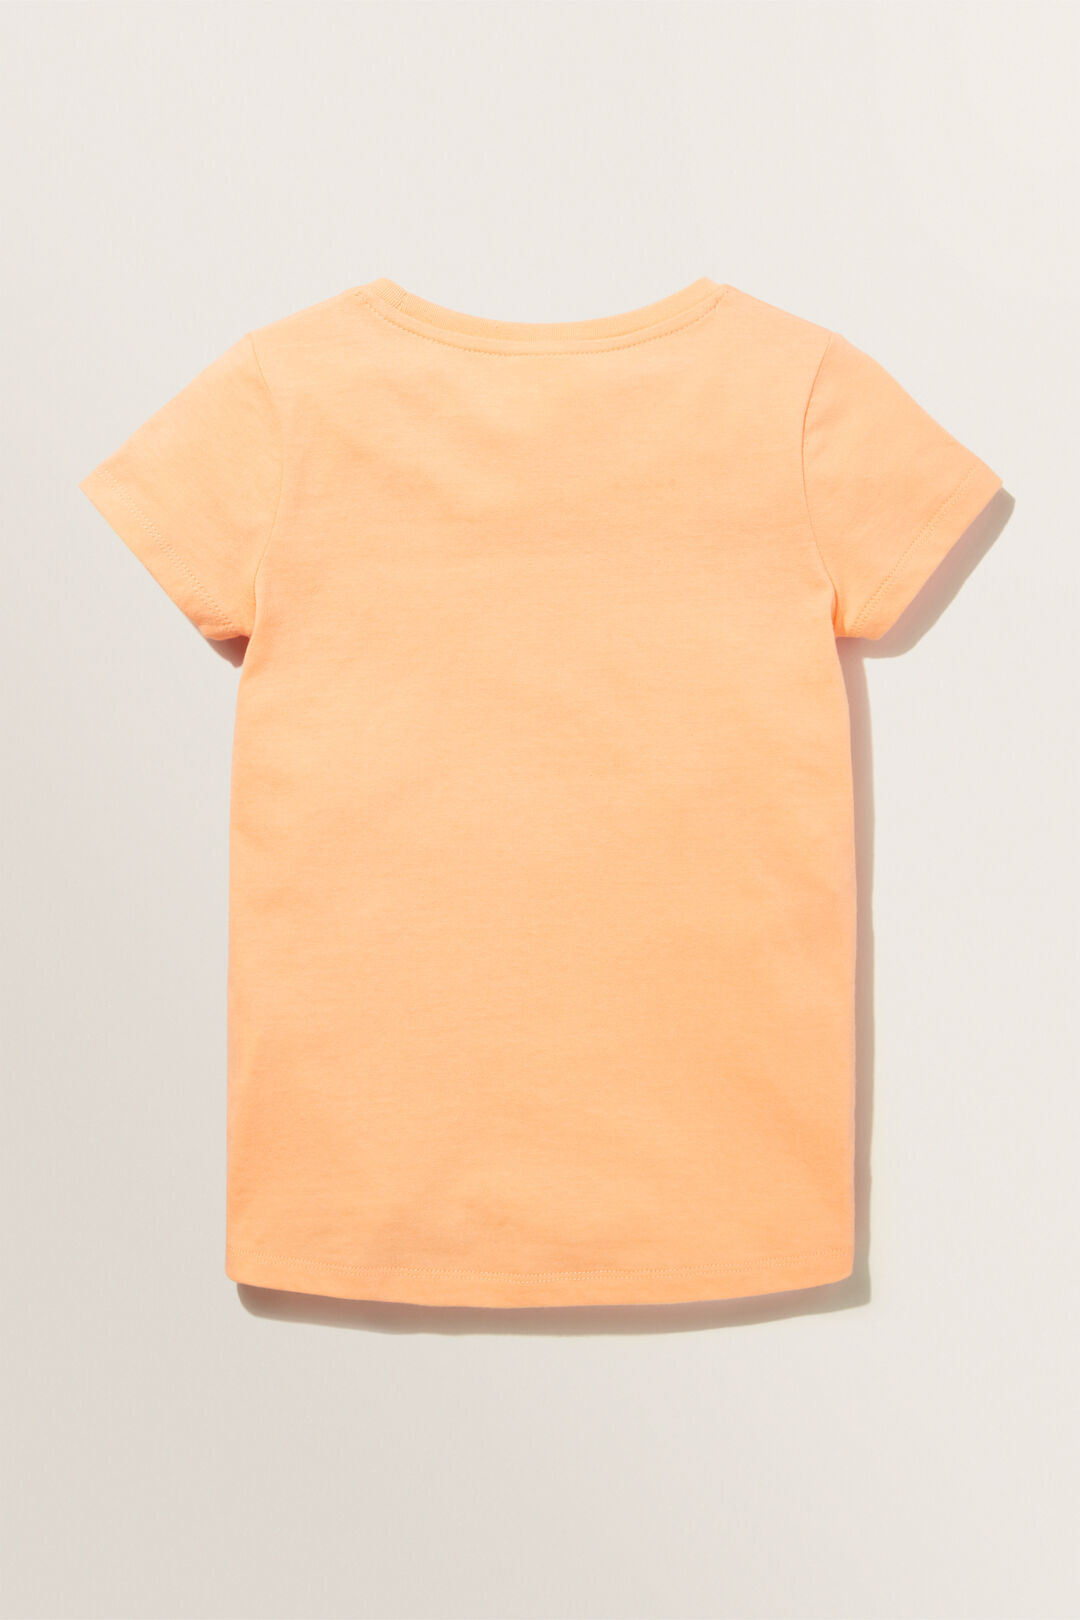 Chenille Flower Tee  Apricot  hi-res